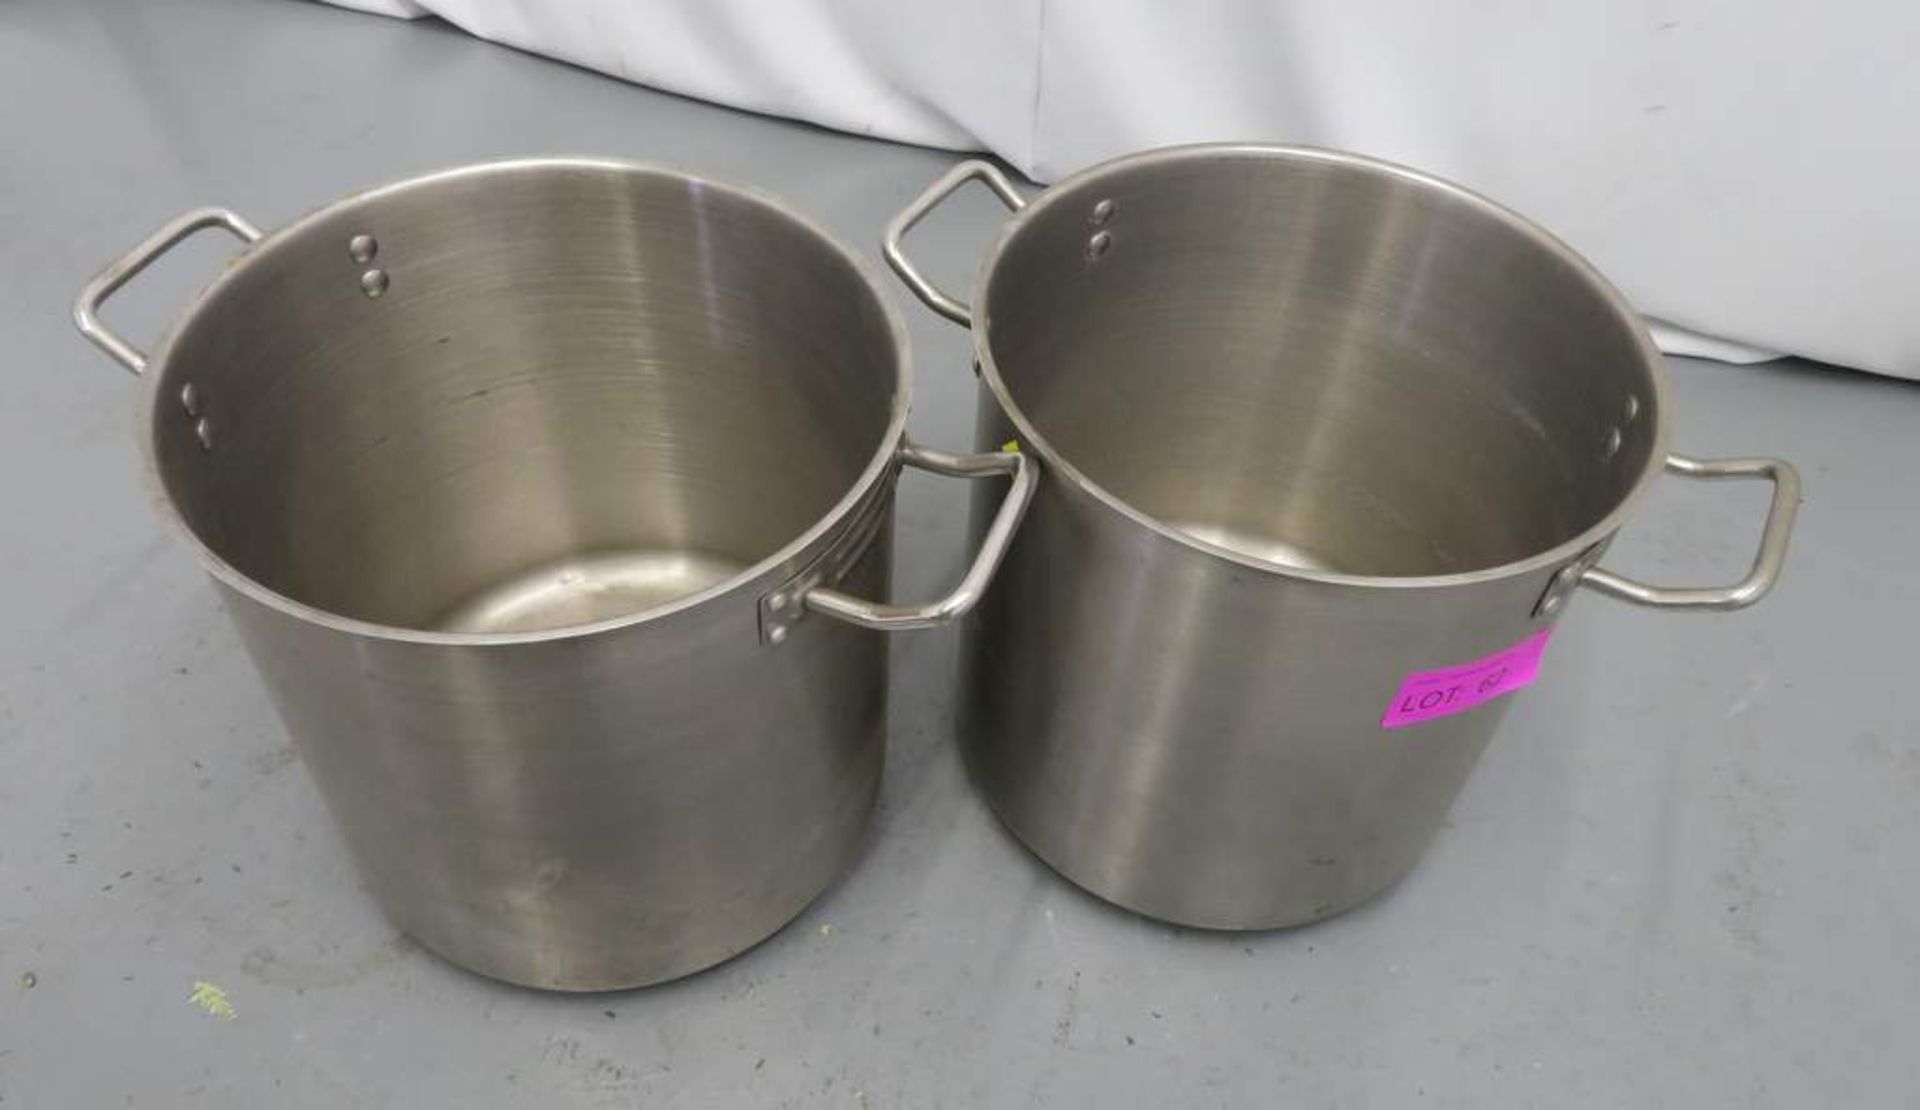 2x Cooking Pot With Handles. - Image 2 of 2